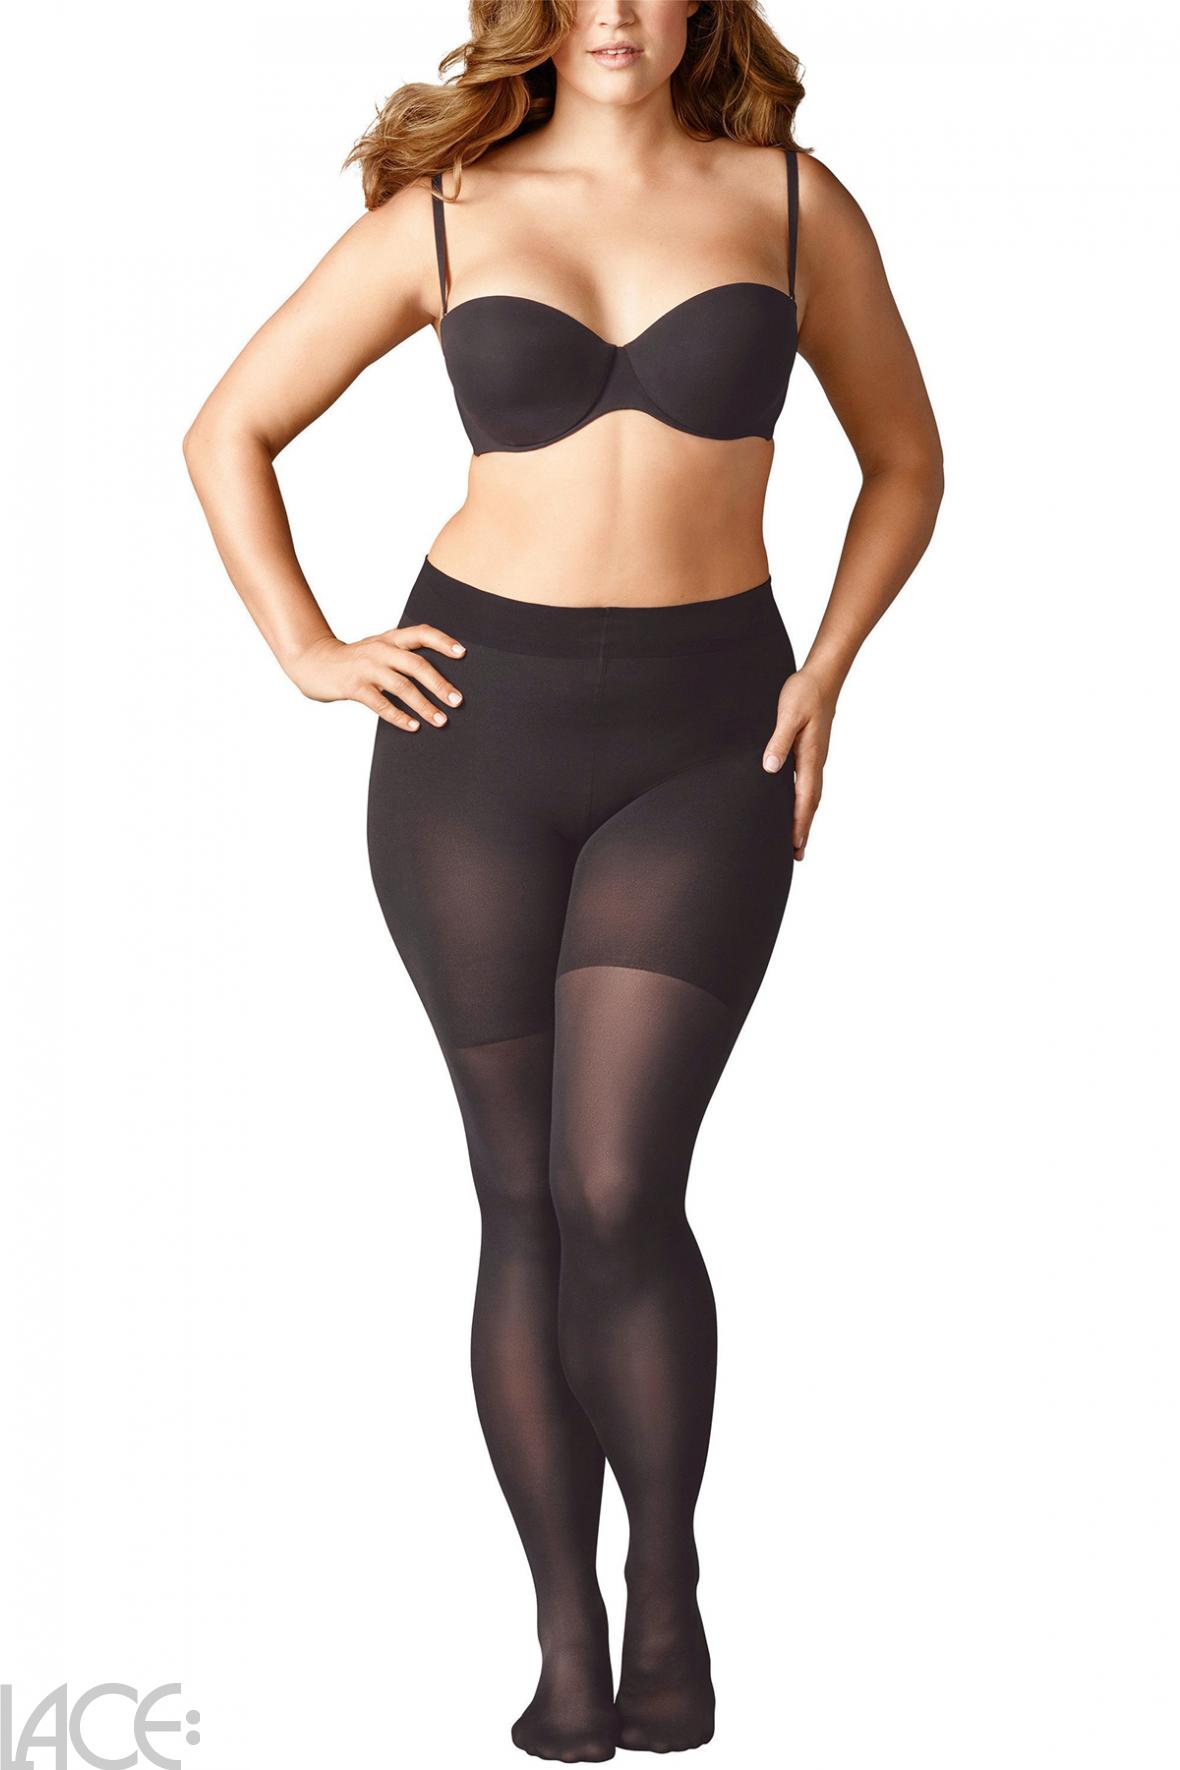  Tights - Falke - Beauty Plus 50 Tights - for